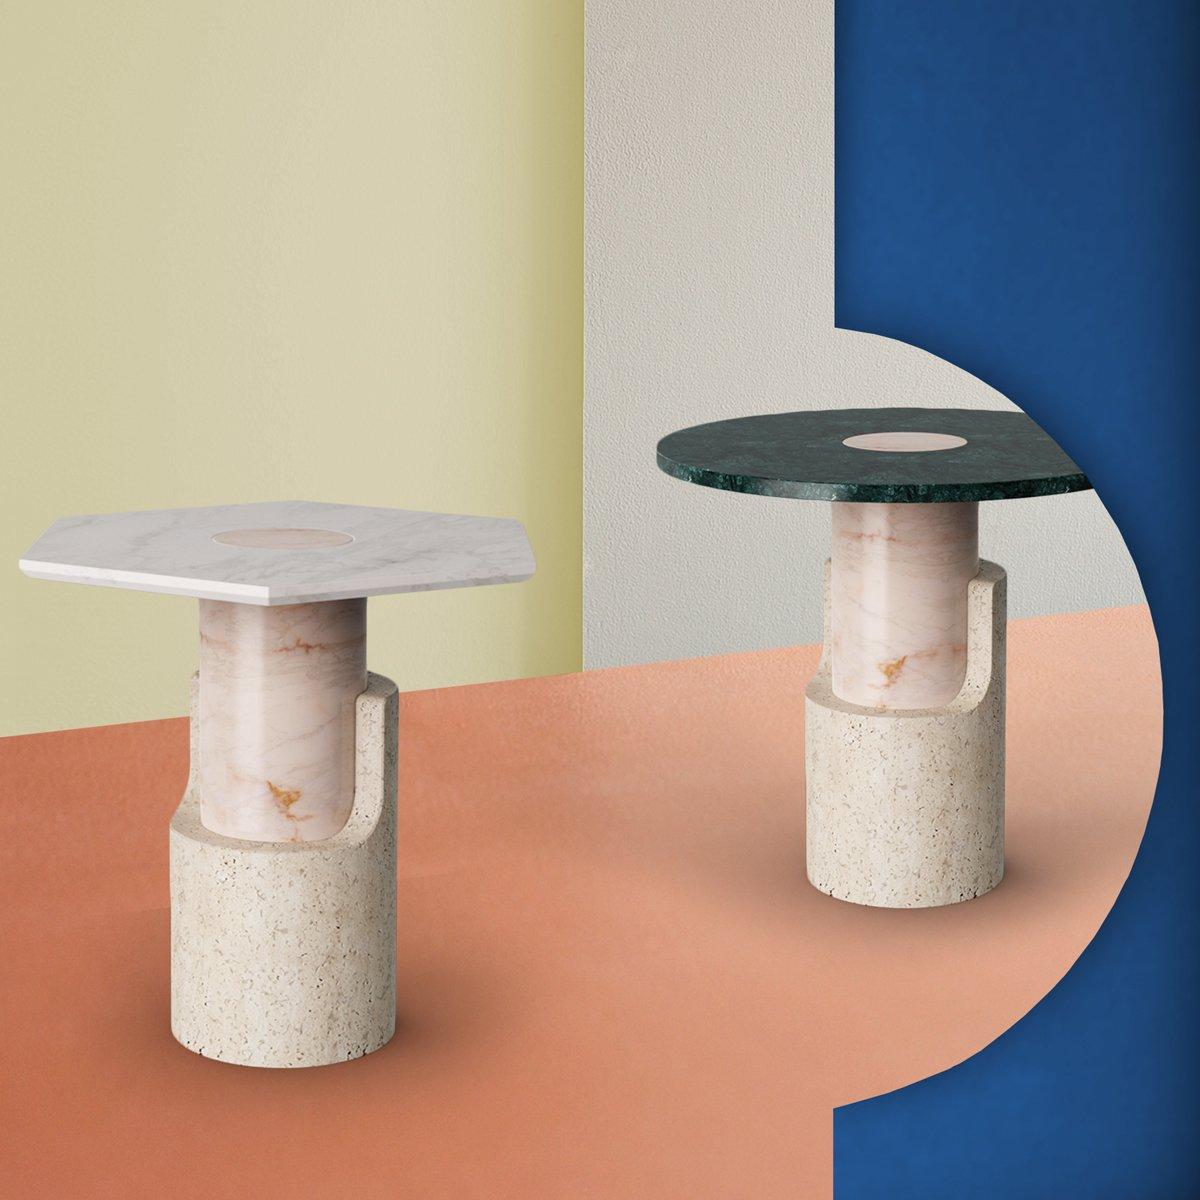 Pair of Braque Contemporary Marble Side Tables by Dooq For Sale 2